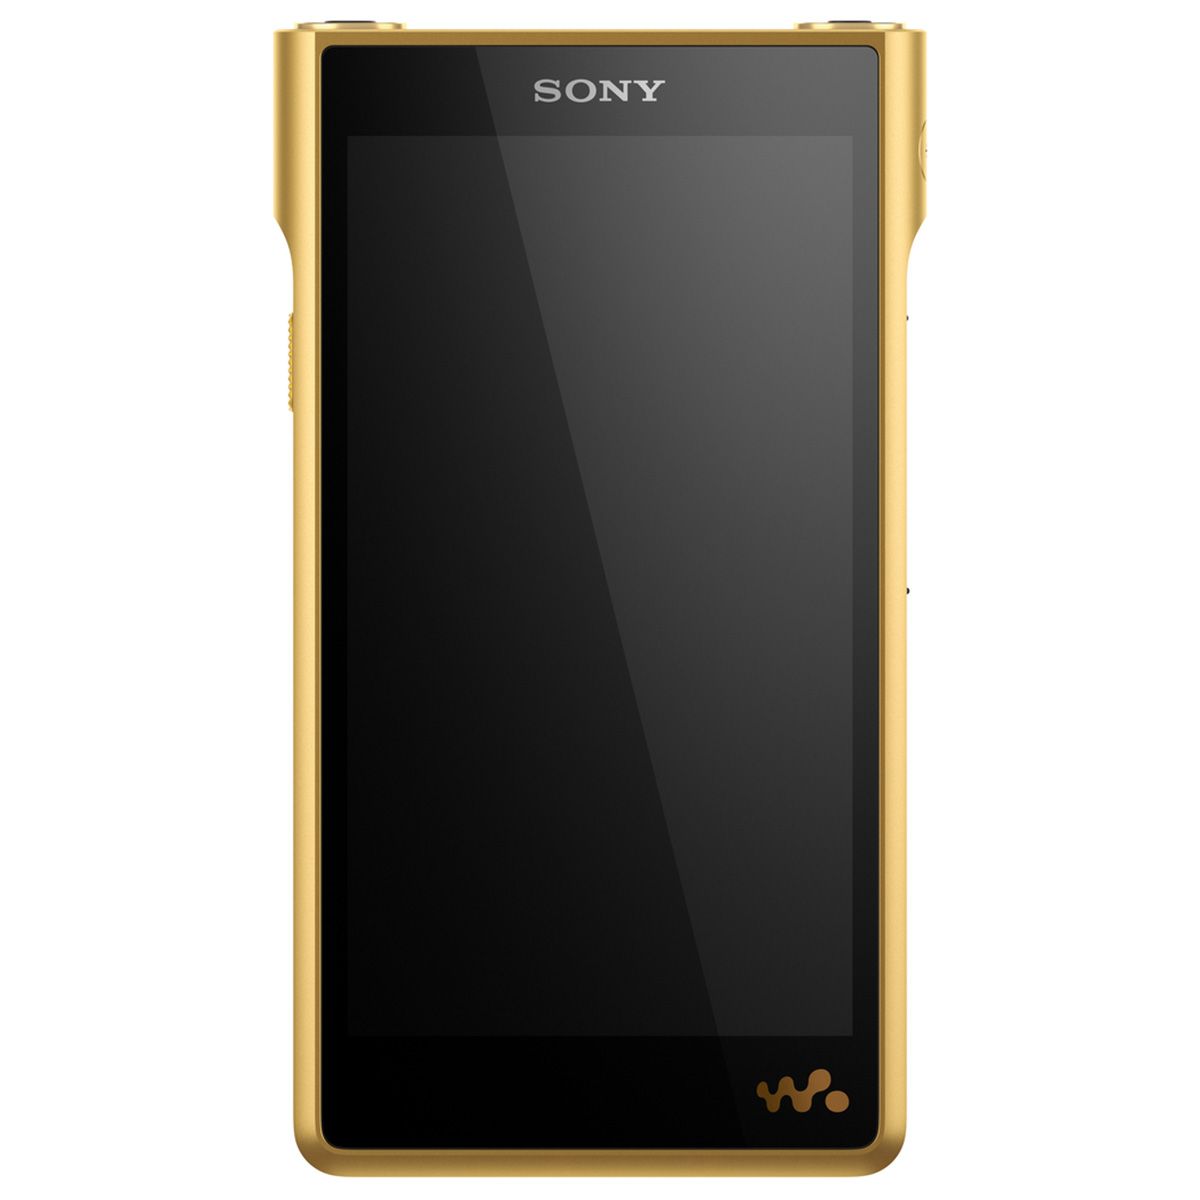 Sony Walkman WM1ZM2 - Signature Series Digital Player - Android 11 - front view with blank screen